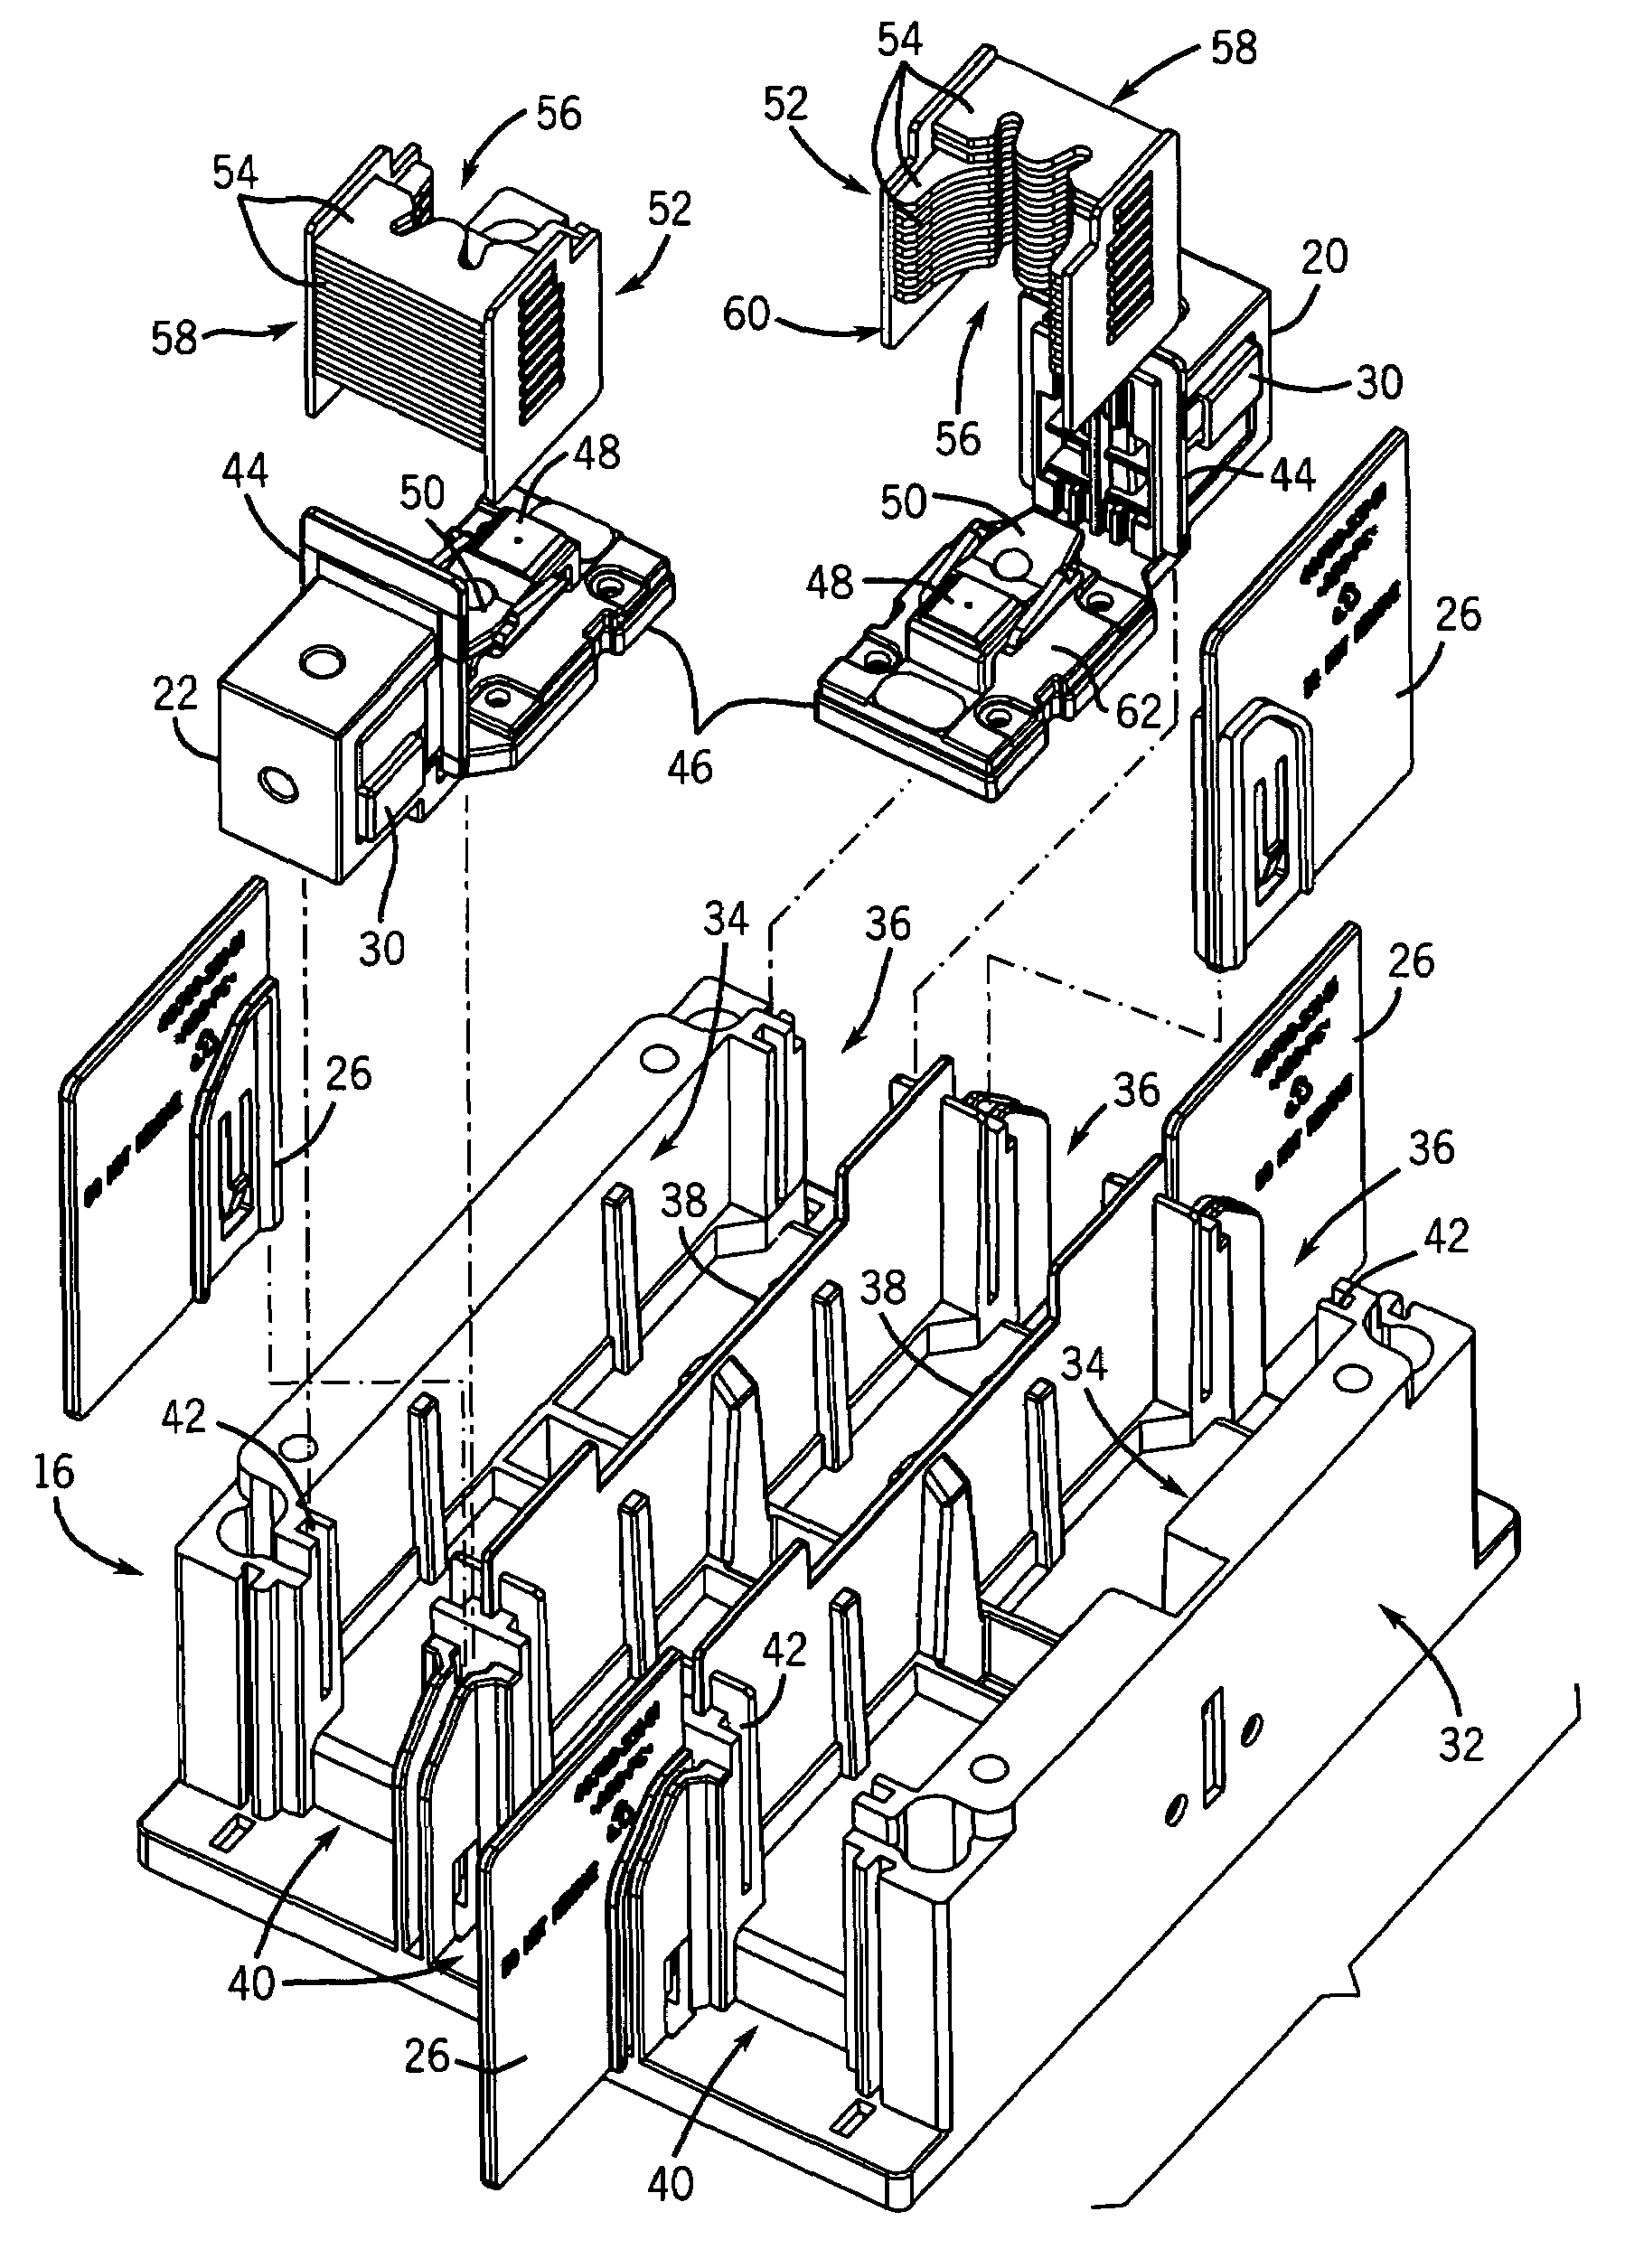 Gas diverter for an electrical switching device